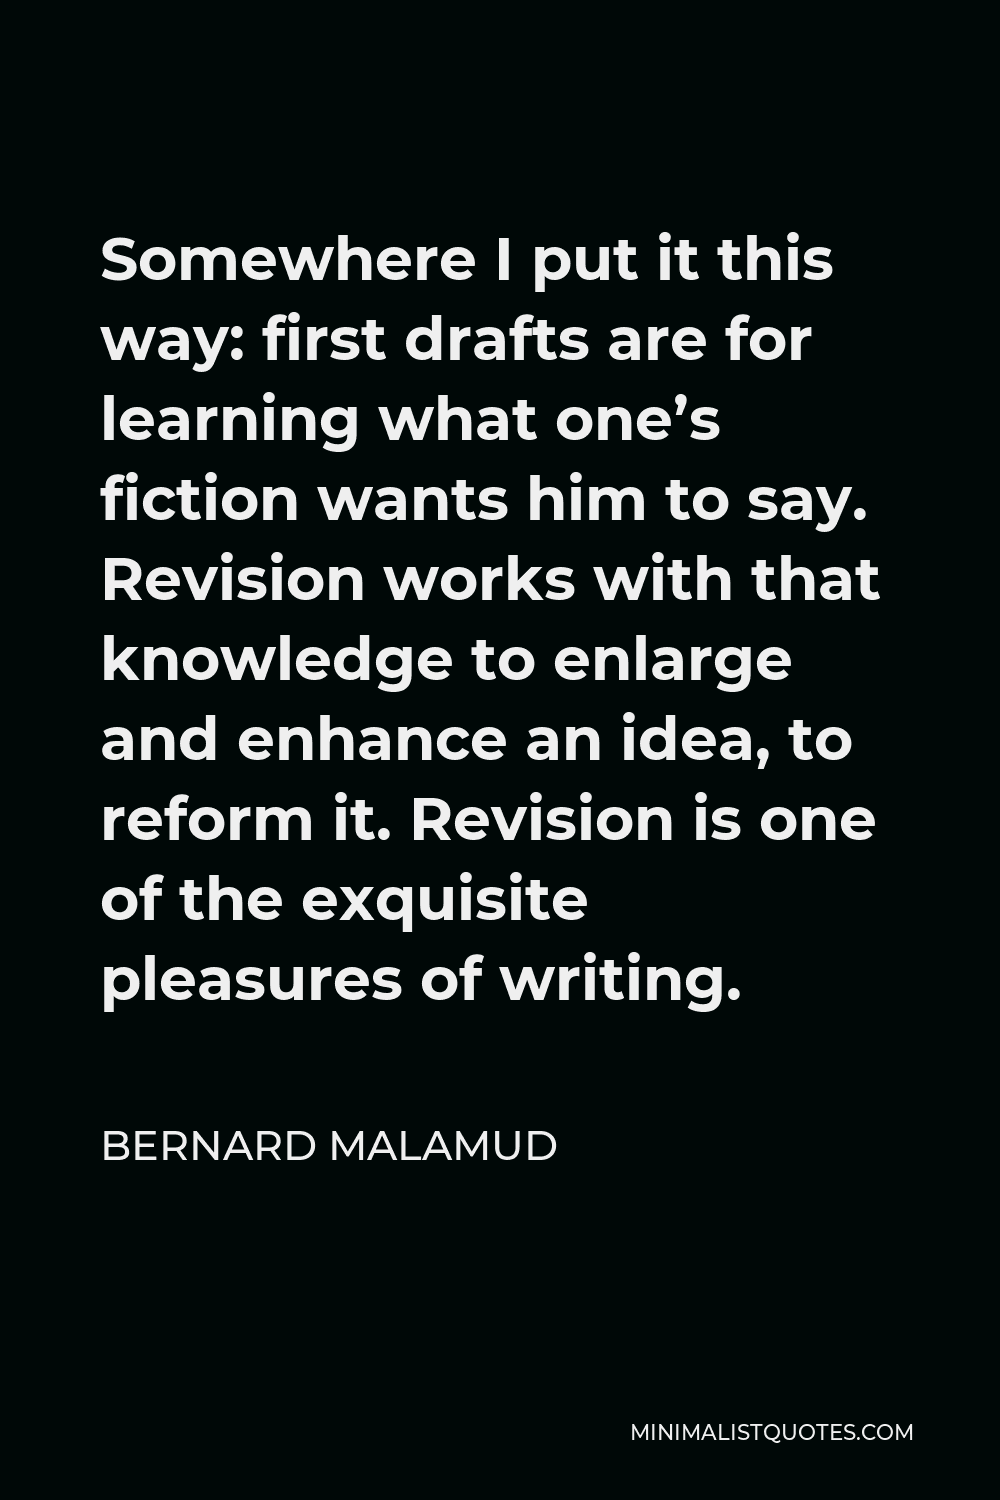 Bernard Malamud Quote - Somewhere I put it this way: first drafts are for learning what one’s fiction wants him to say. Revision works with that knowledge to enlarge and enhance an idea, to reform it. Revision is one of the exquisite pleasures of writing.